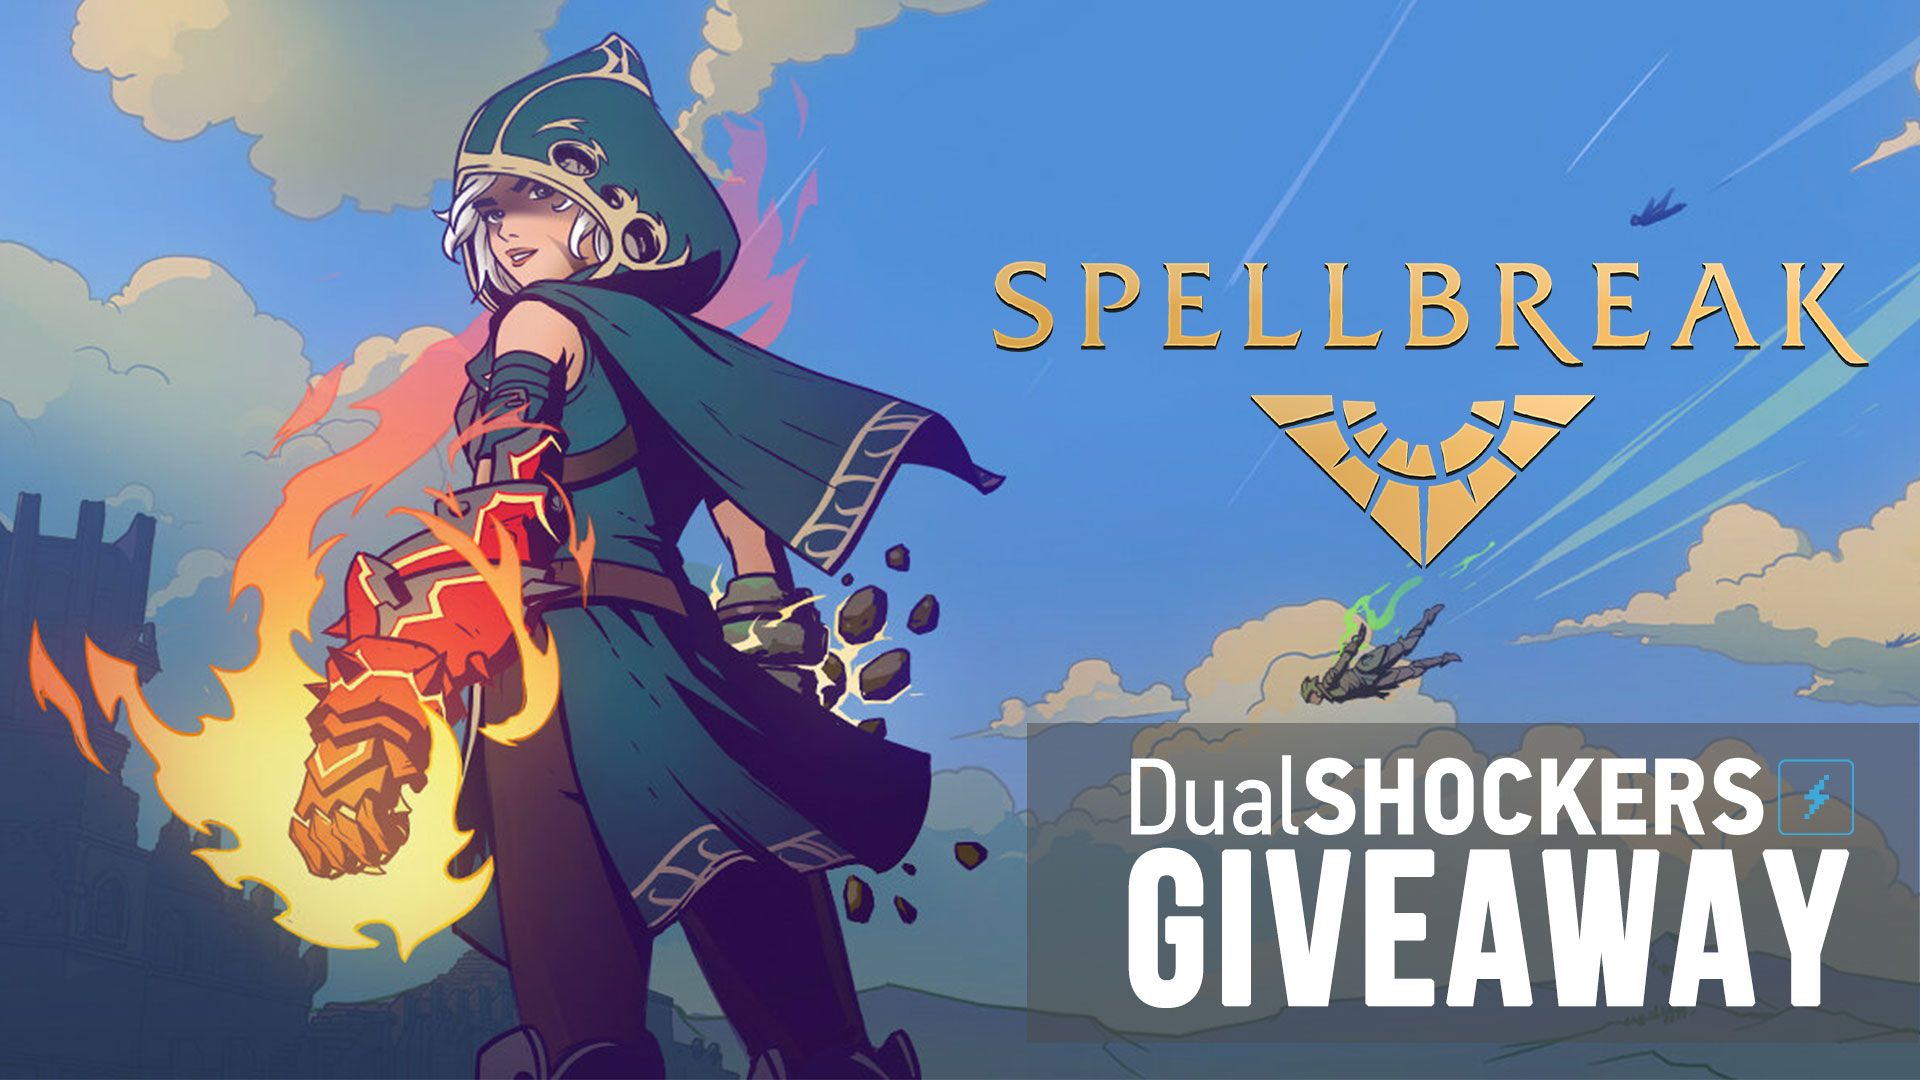 Spellbreak Giveaway Win One Pack Codes for PS4